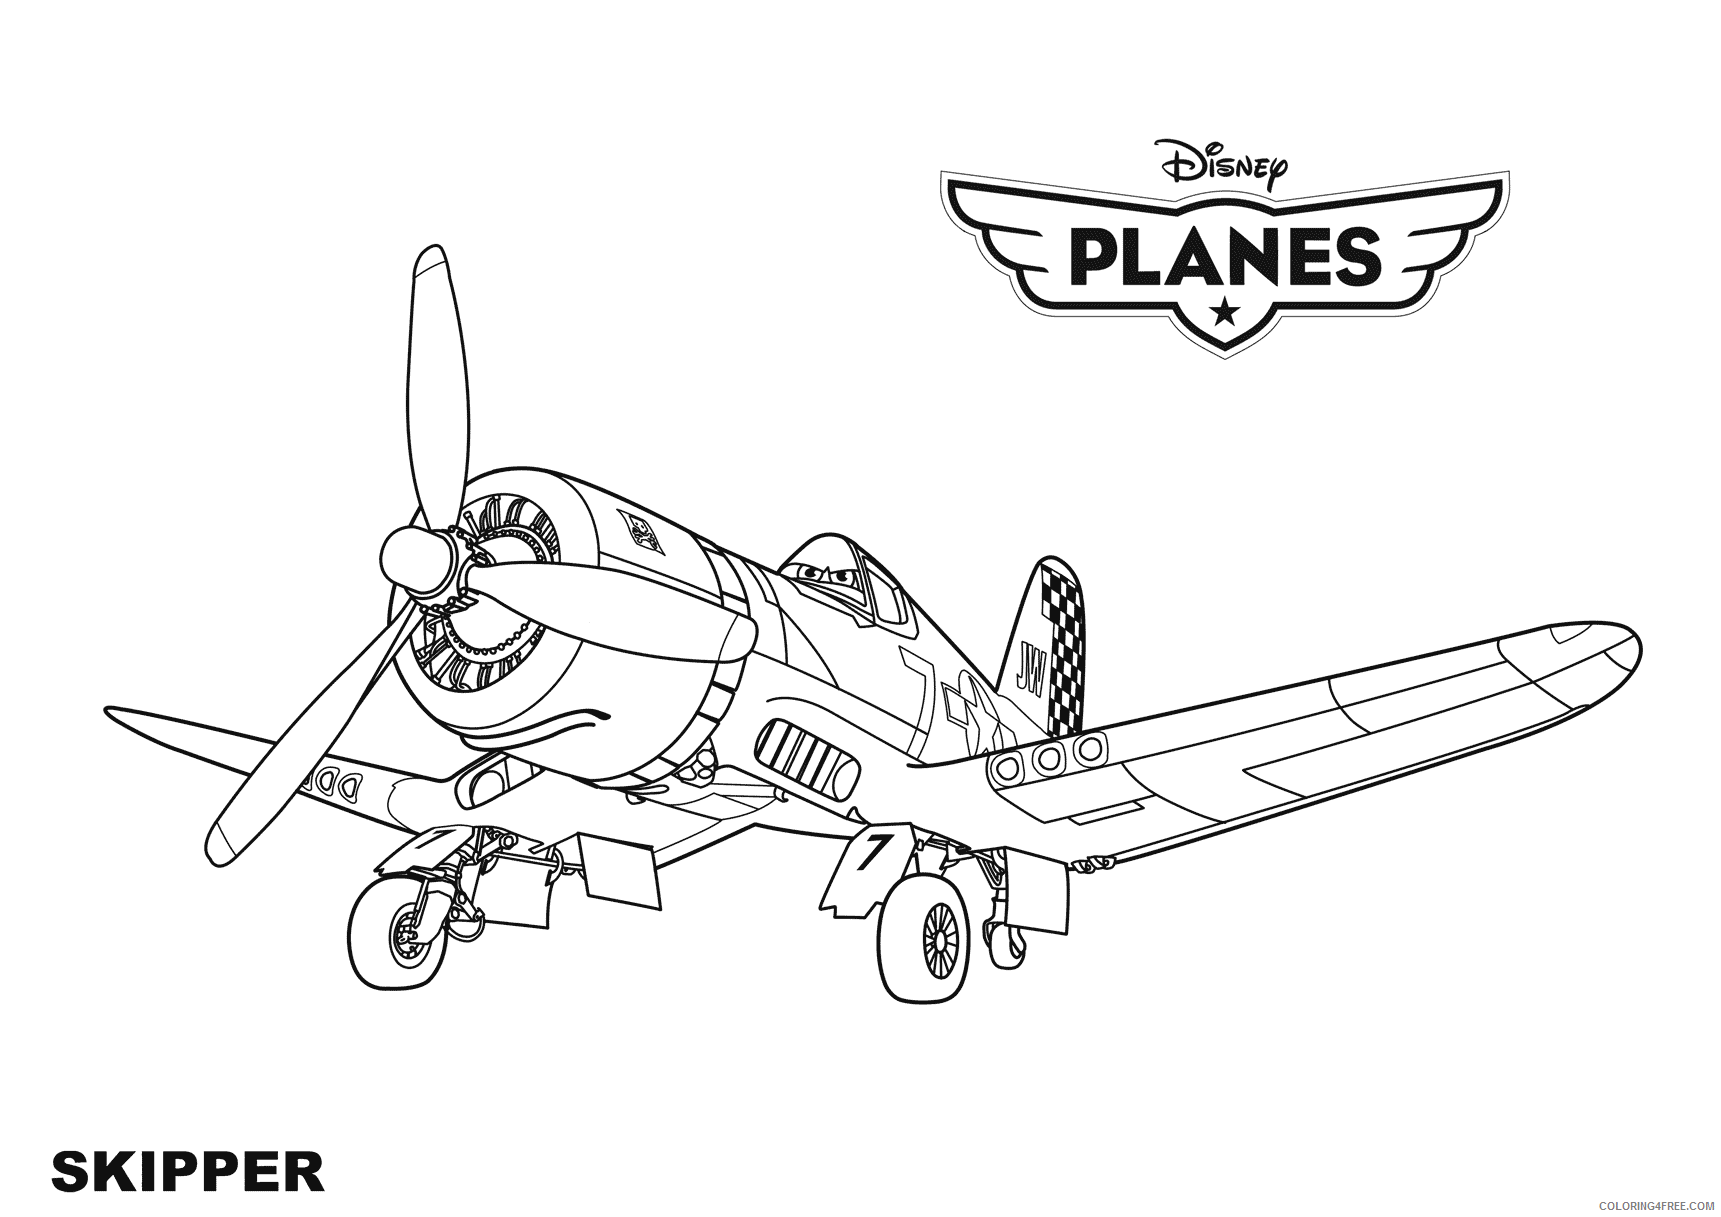 Disney Planes Coloring Pages Cartoons Skipper Planes Printable 2020 2363 Coloring4free